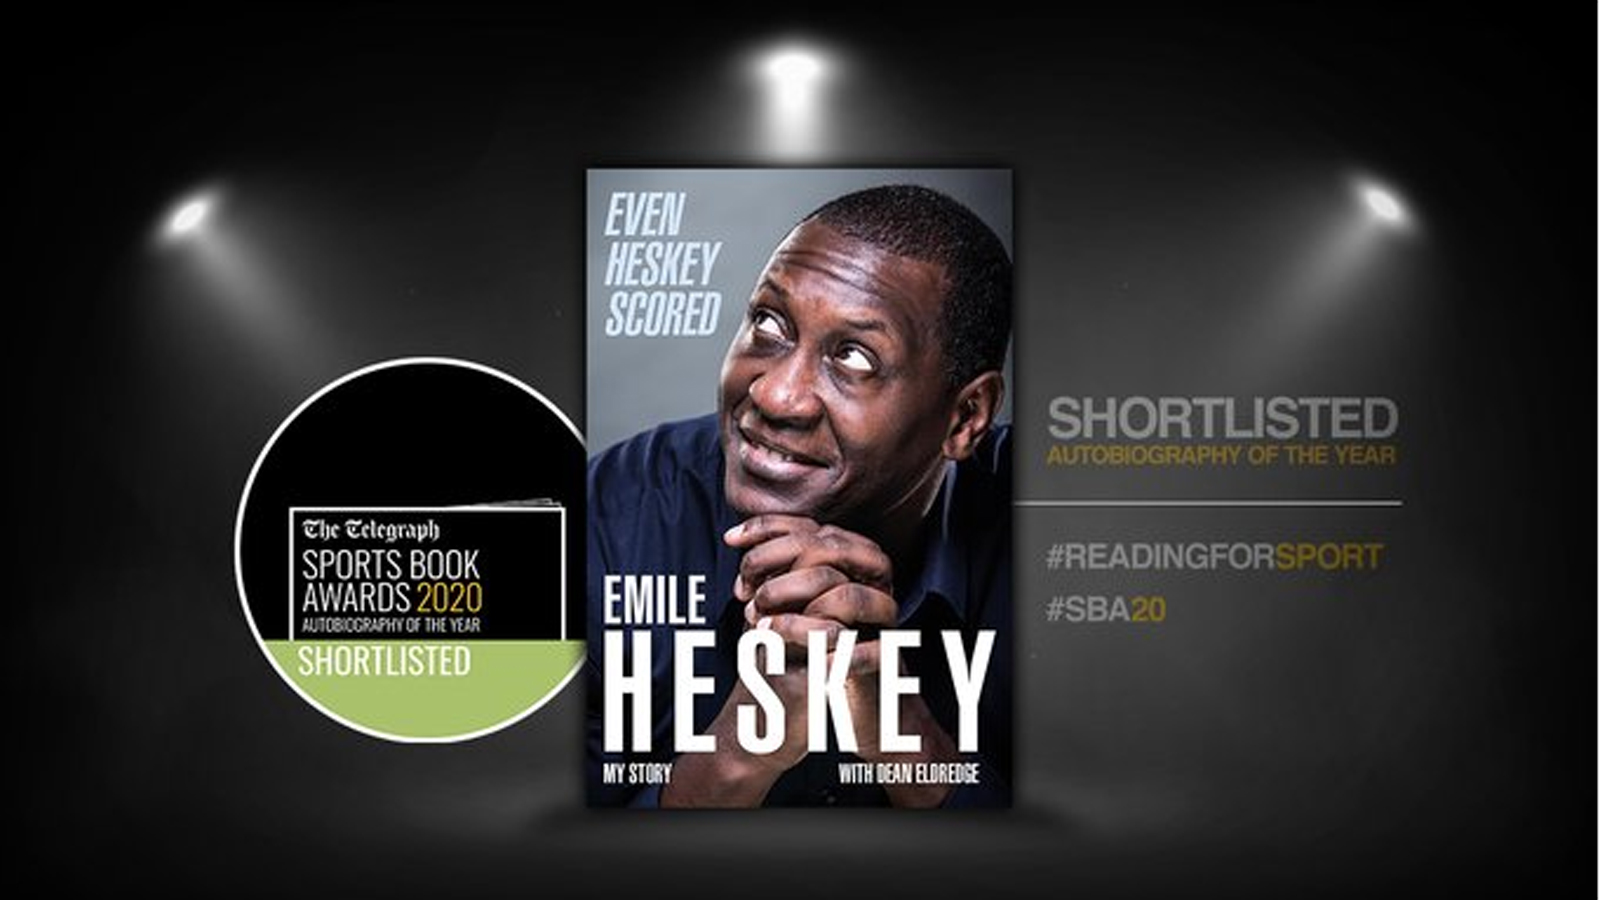 HESKEY ON SPORTS BOOK OF THE YEAR SHORTLIST